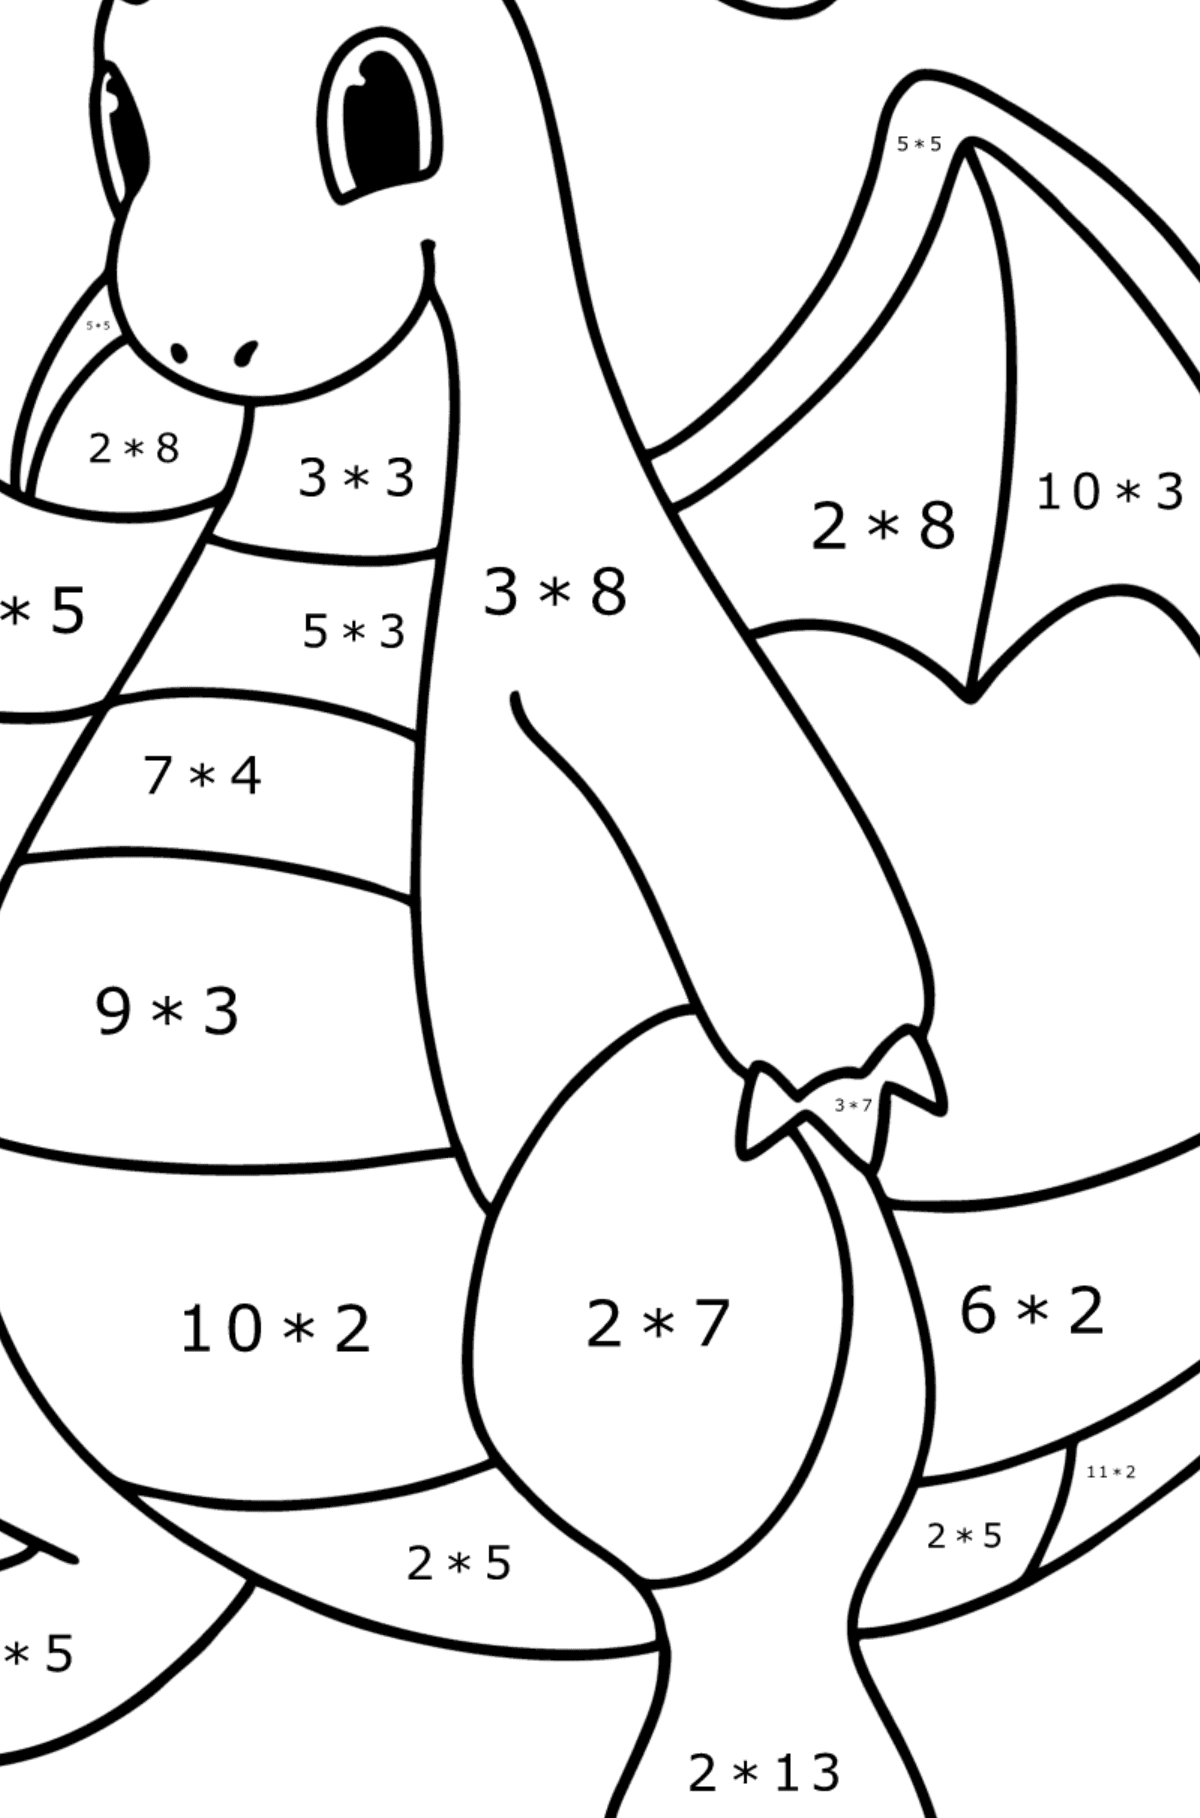 Pokemon Go Dragonite coloring page - Math Coloring - Multiplication for Kids